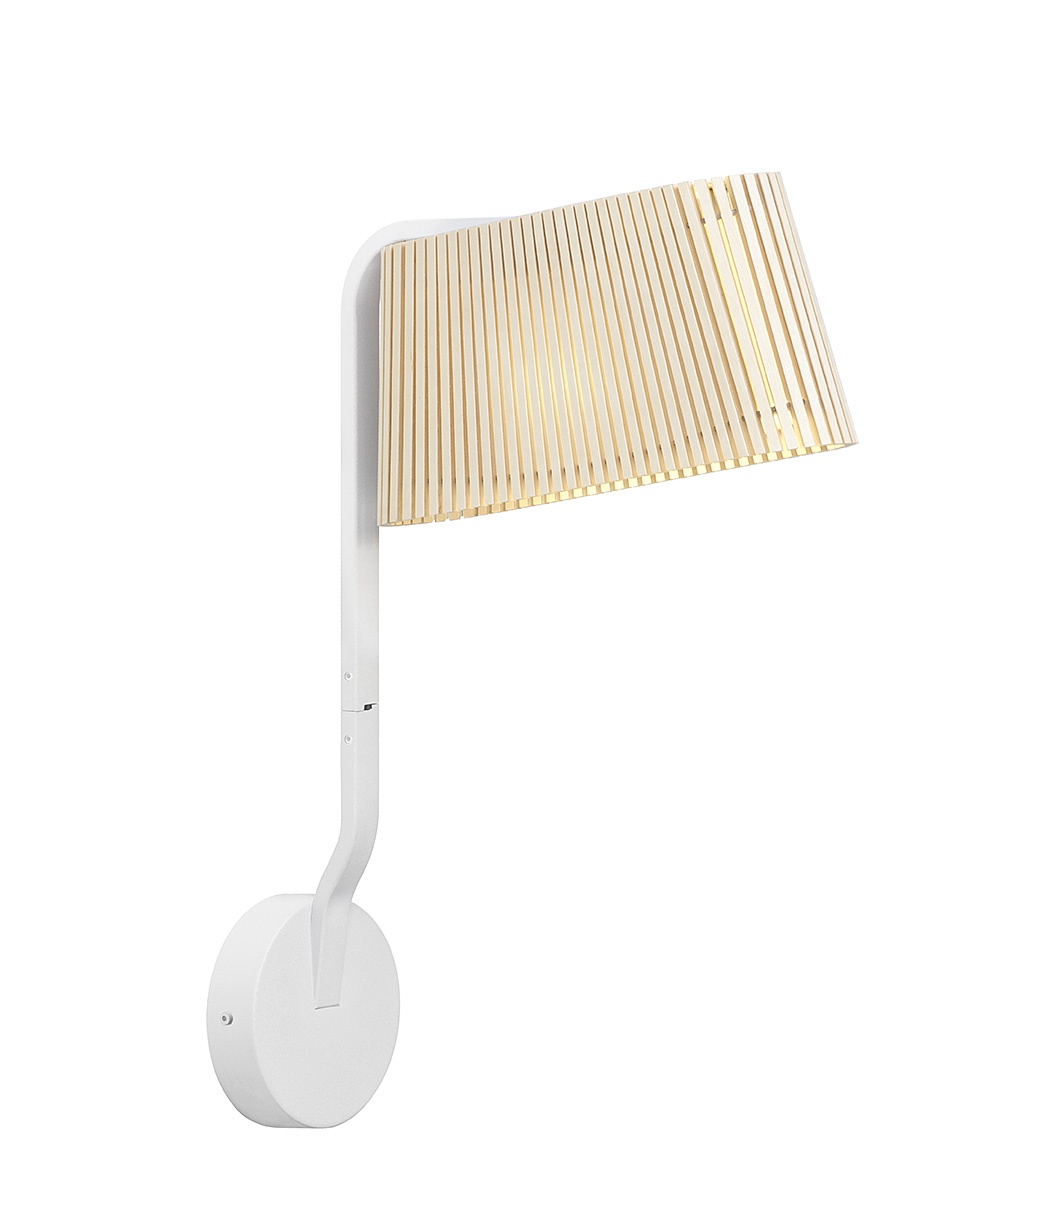 Owalo 7030 wall lamp is available in natural birch